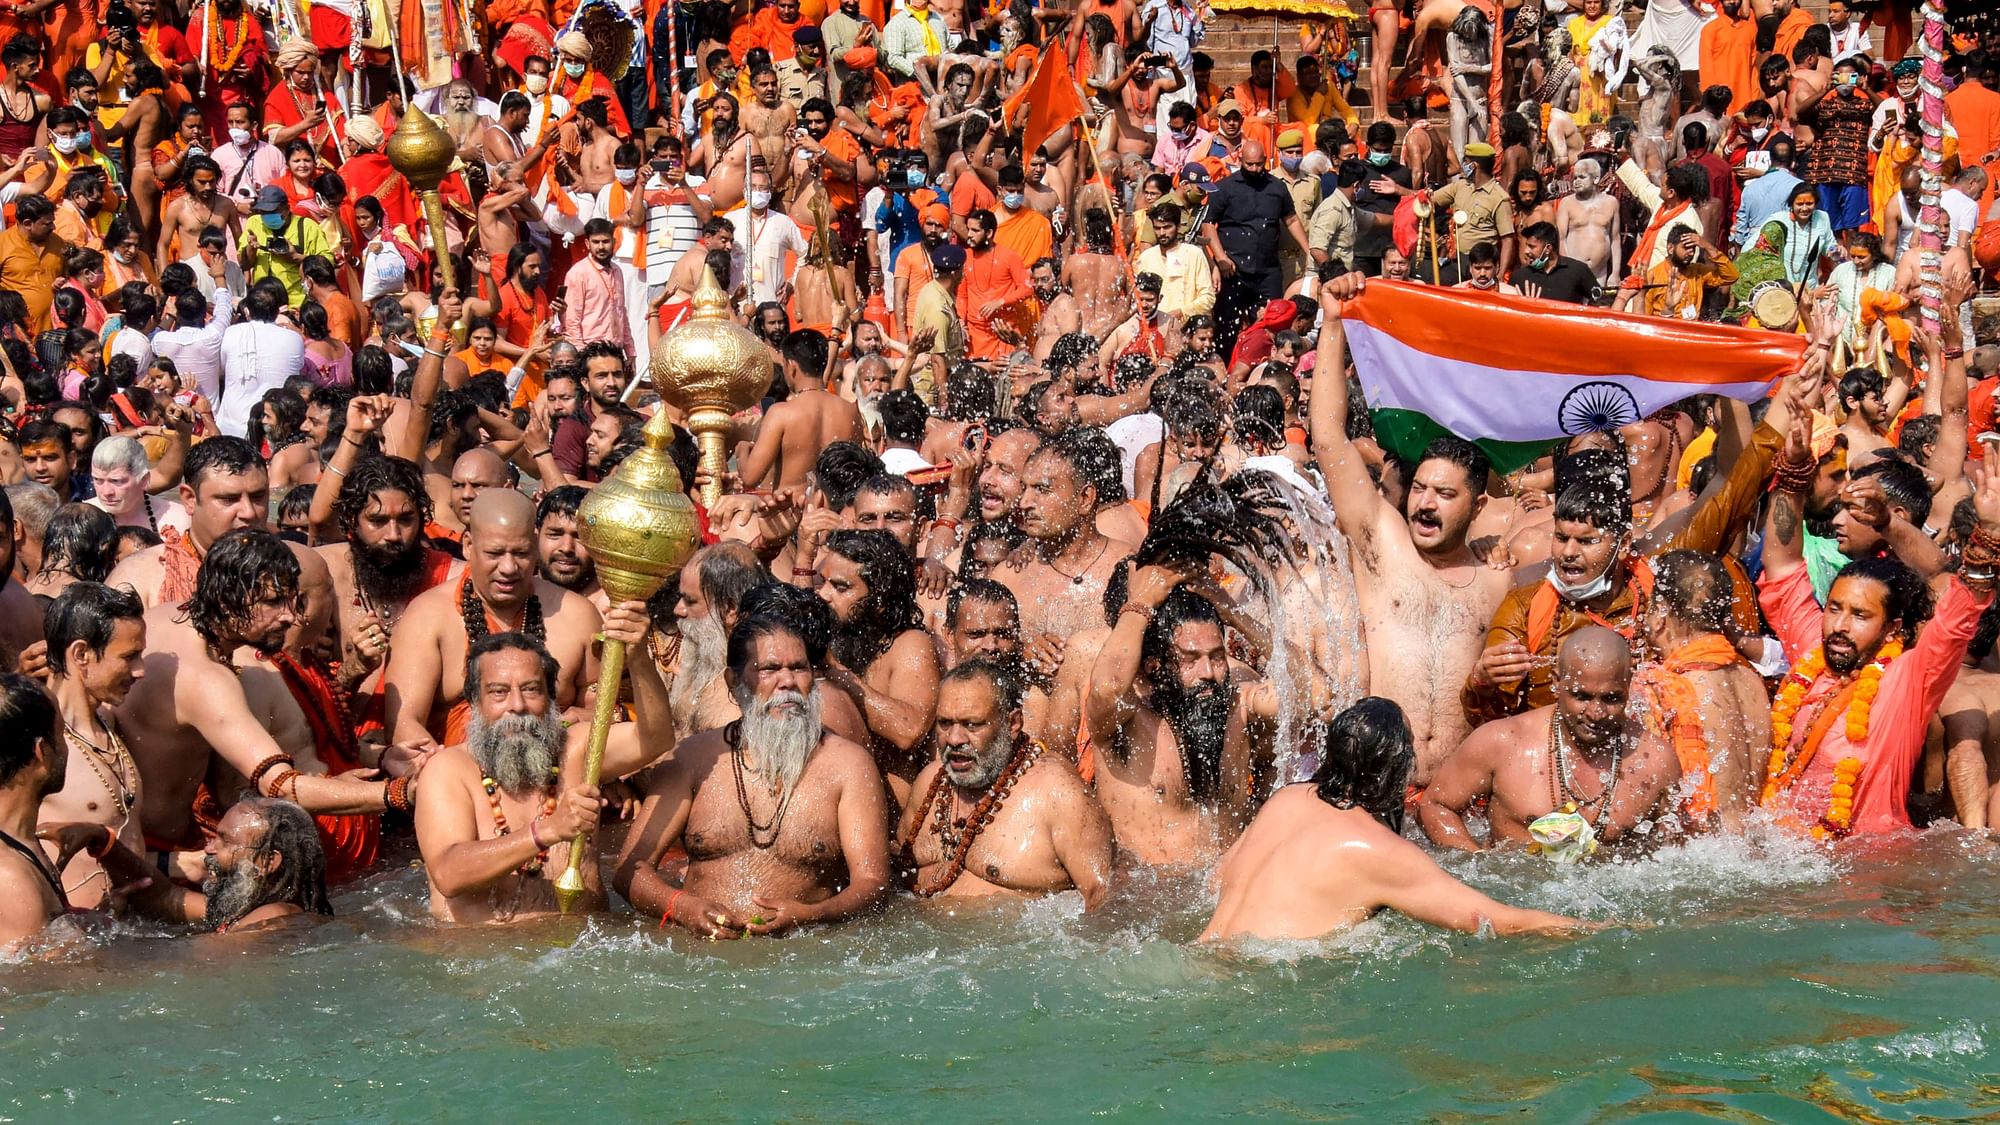 Devotees gather to offer prayers during the third Shahi Snan of the Kumbh Mela 2021, at Har ki Pauri Ghat in Haridwar. (Image used for representational purpose only.)